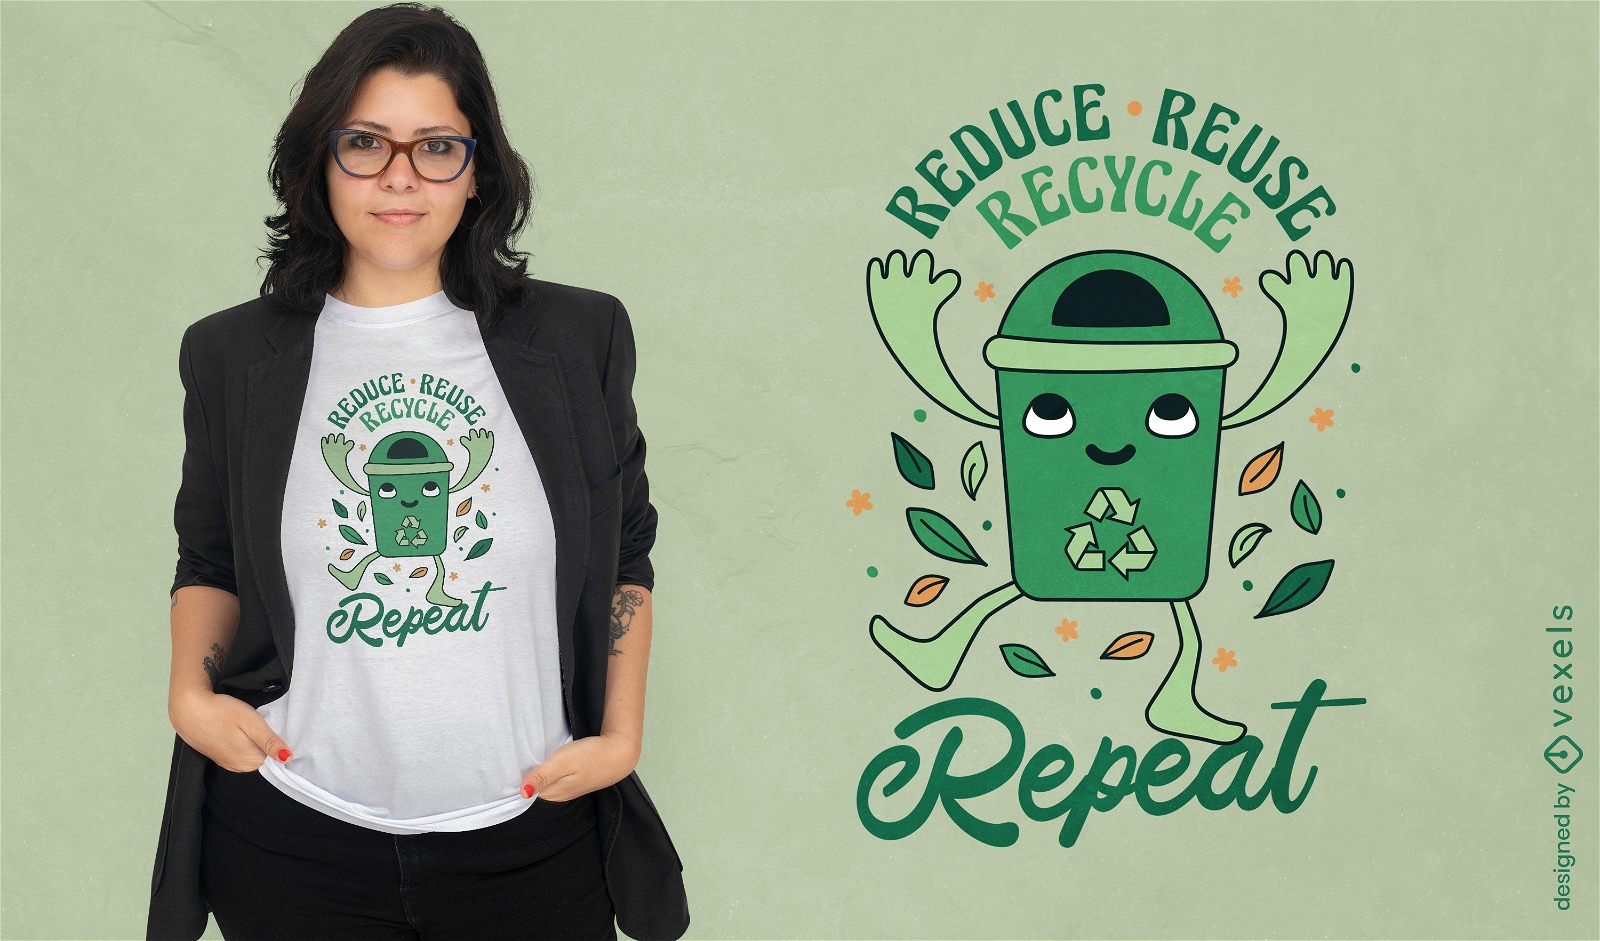 Reduce reuse recycle t-shirt design